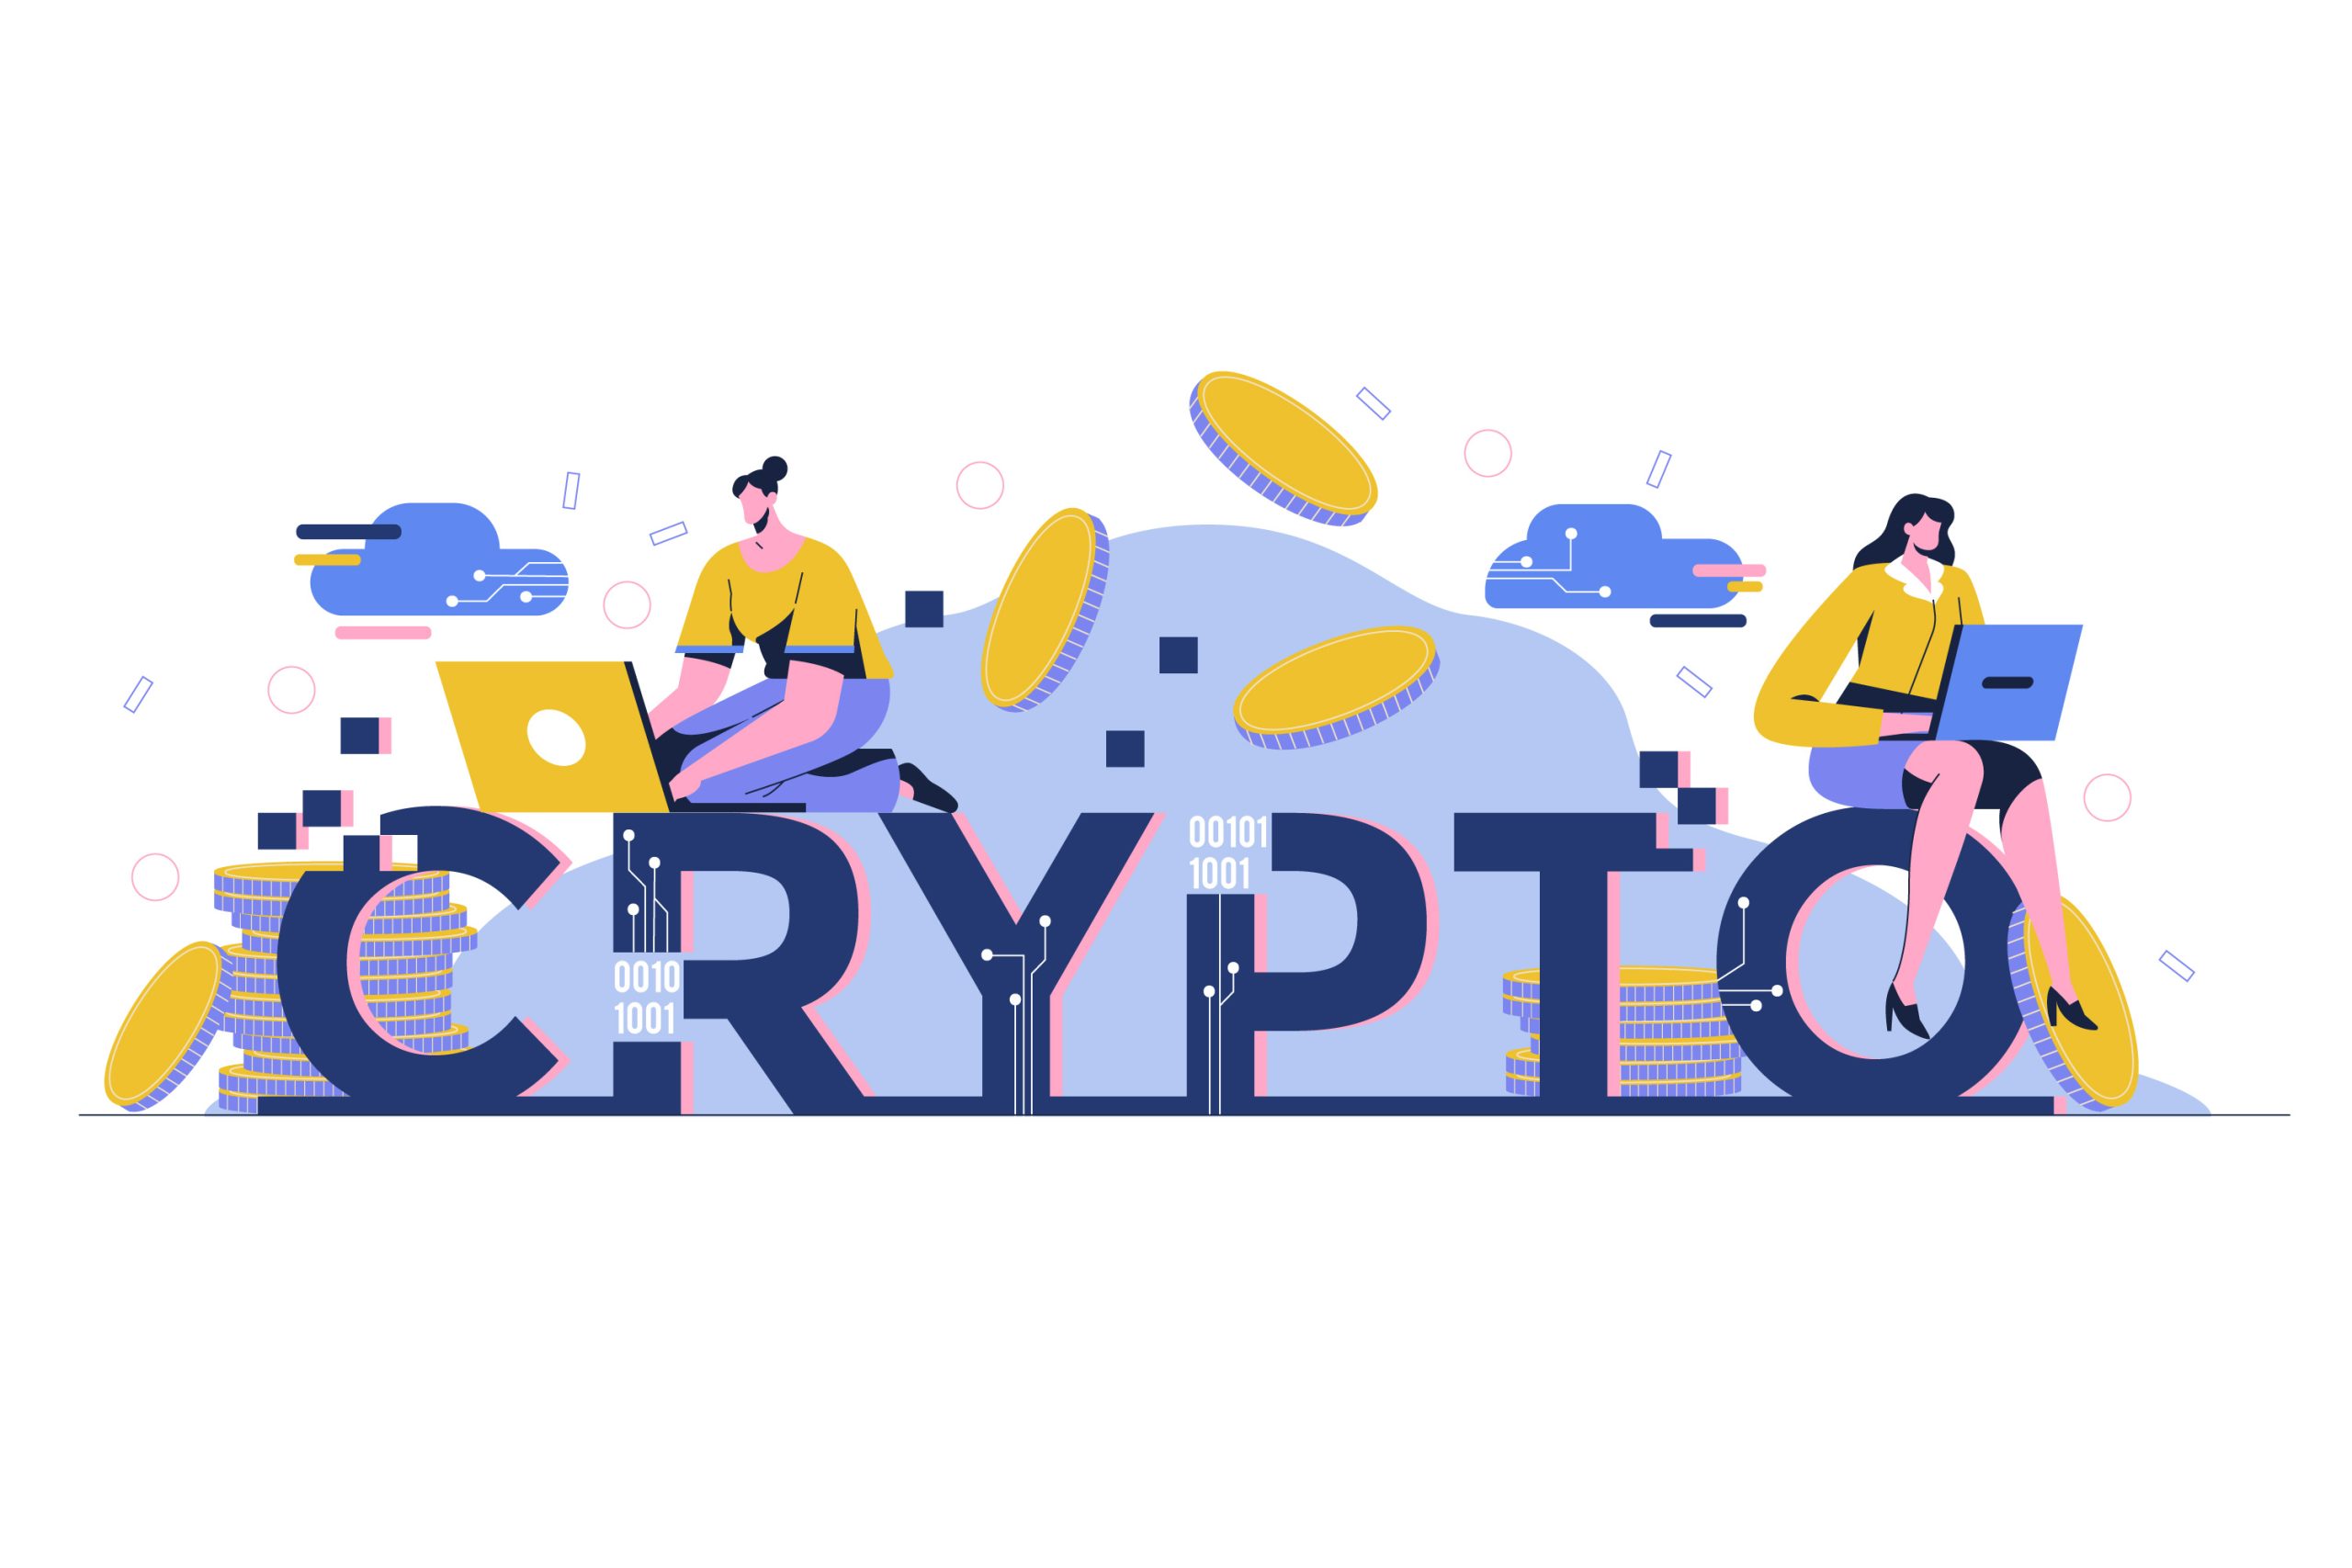 Instructions on how to write effective content for crypto advertising campaigns